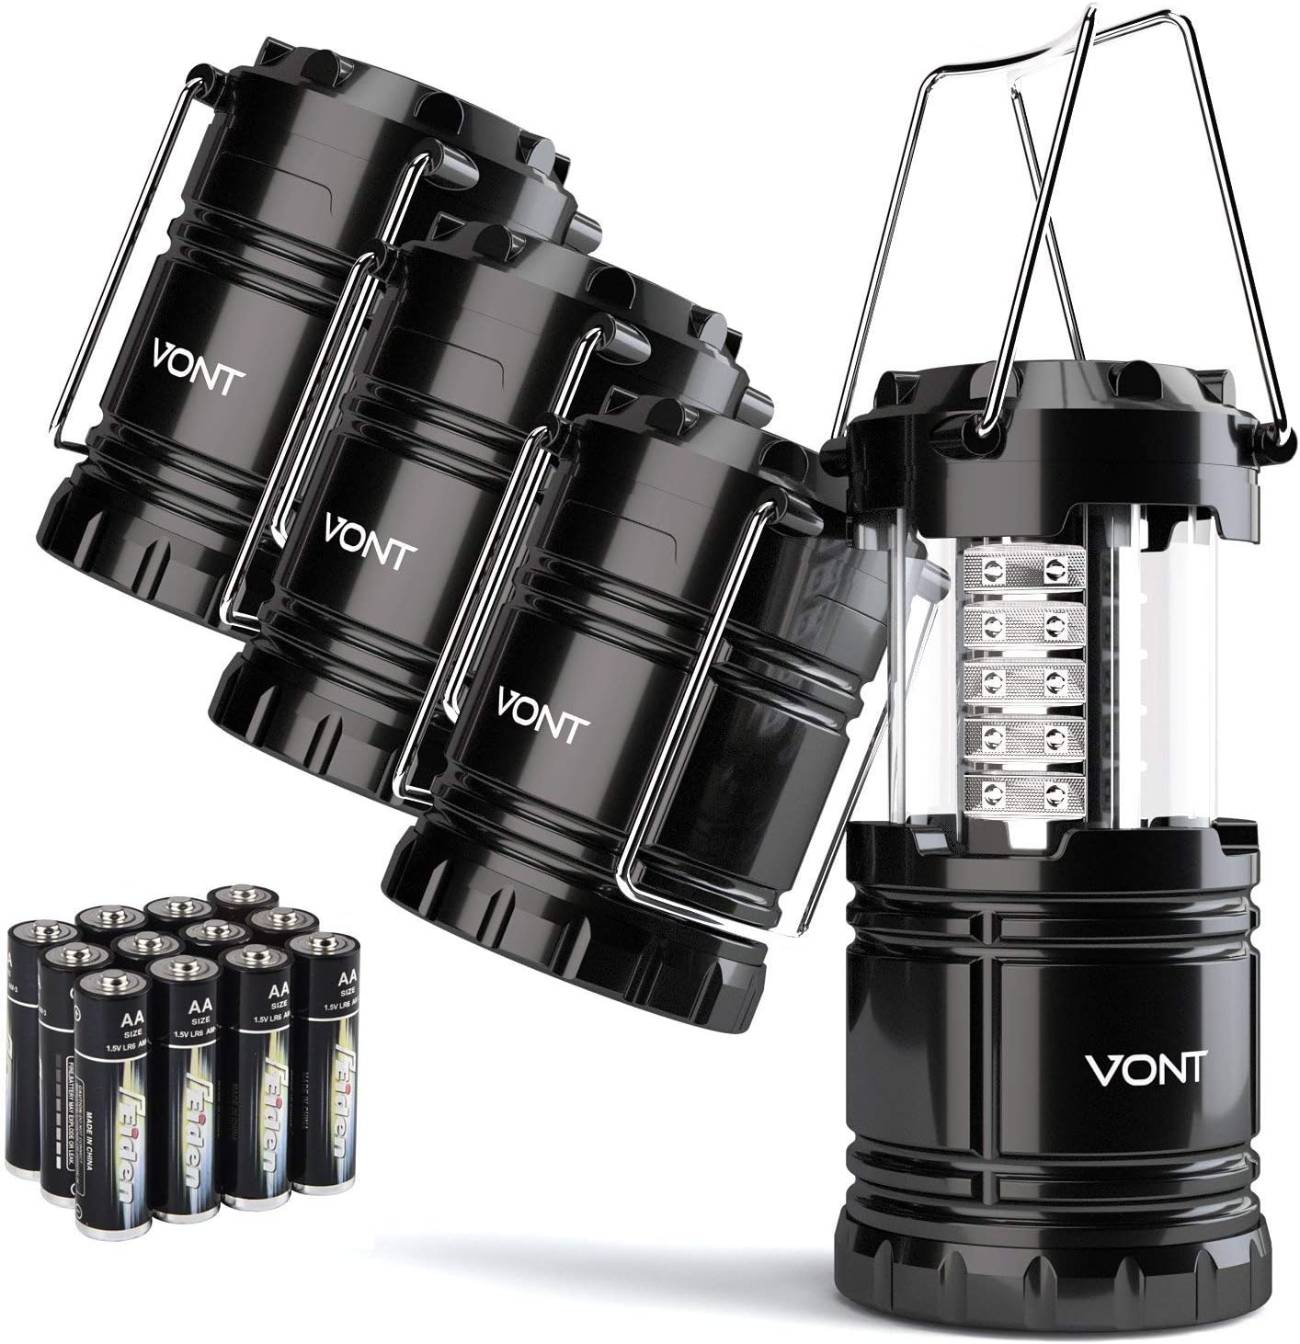 Vont 4pack Led Camping Lantern – Camping Equipment